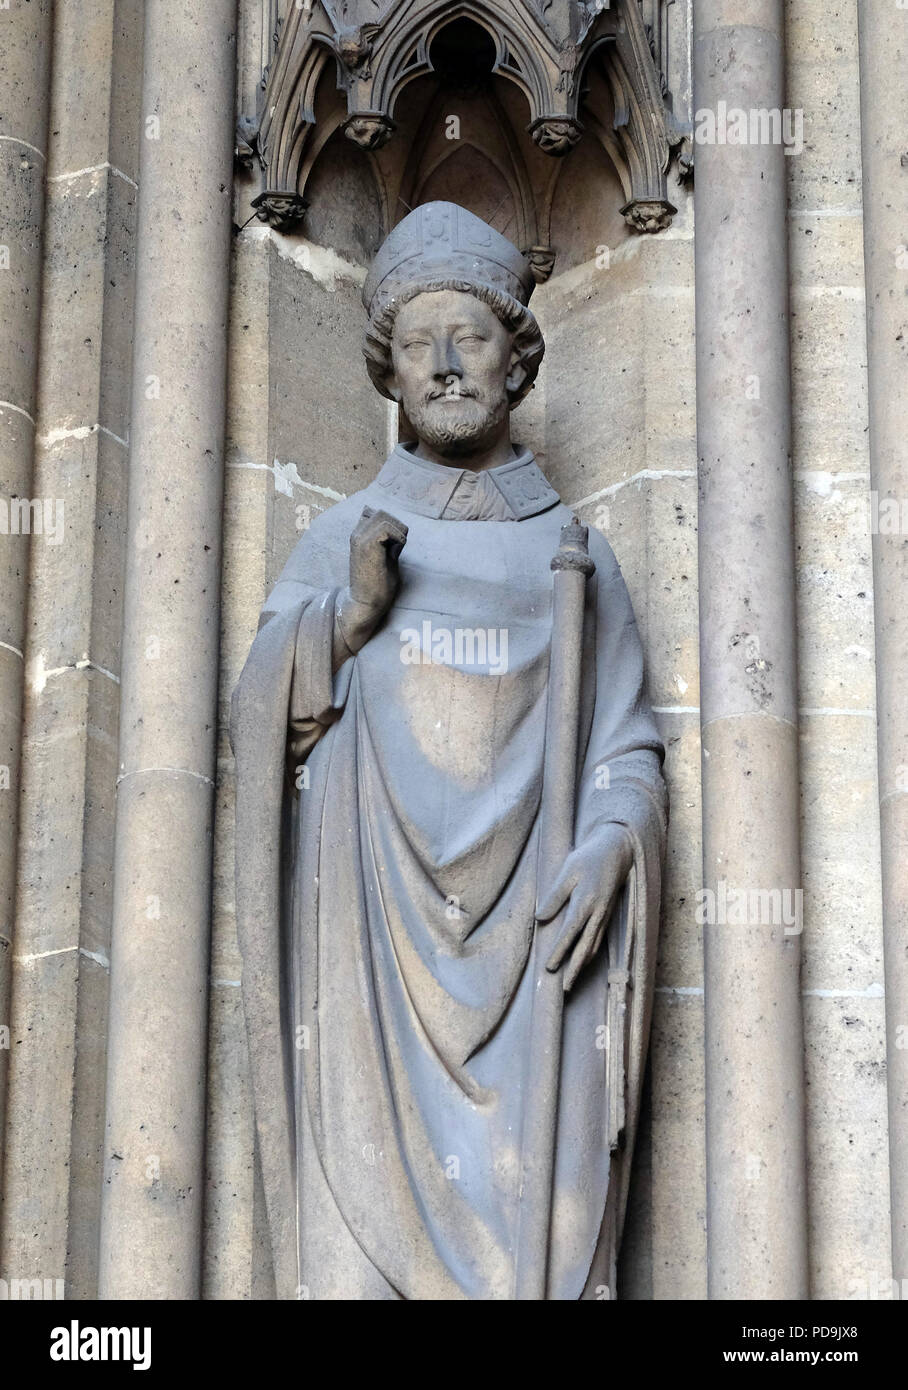 Saint Martial, was the first bishop of Limoges, statue on the portal of the Basilica of Saint Clotilde in Paris, France Stock Photo